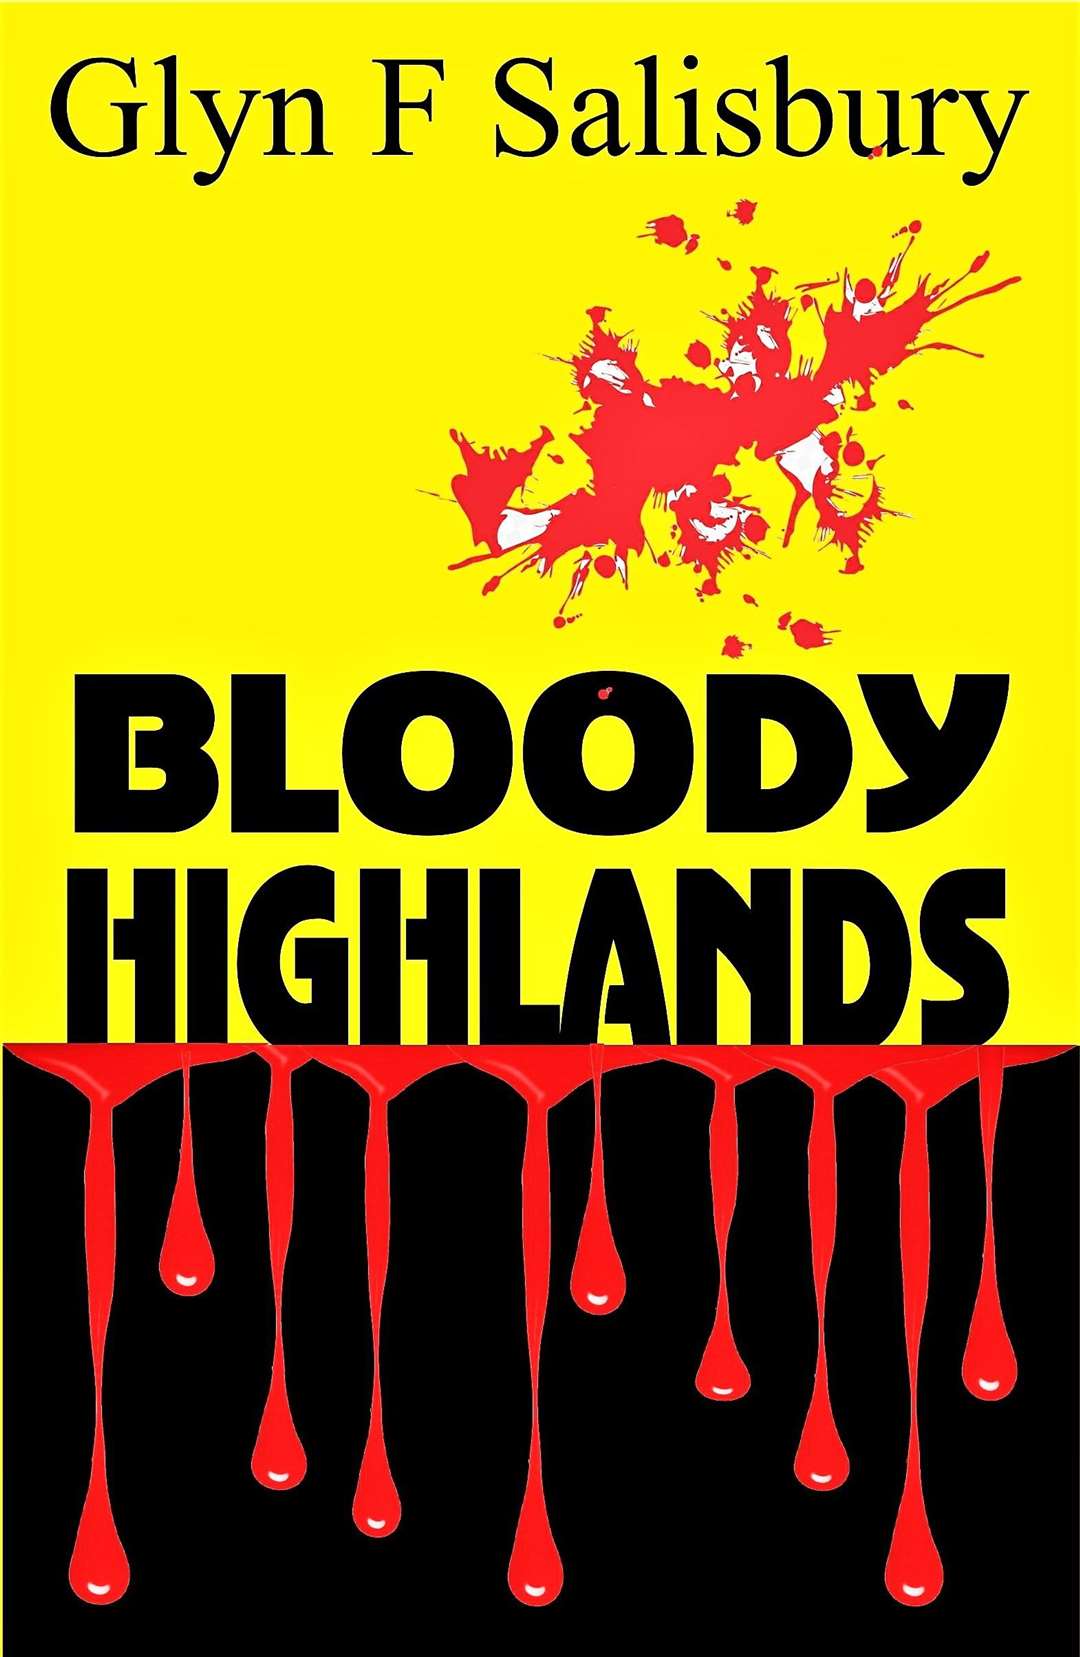 Book cover for Bloody Highlands by Glyn Salisbury.